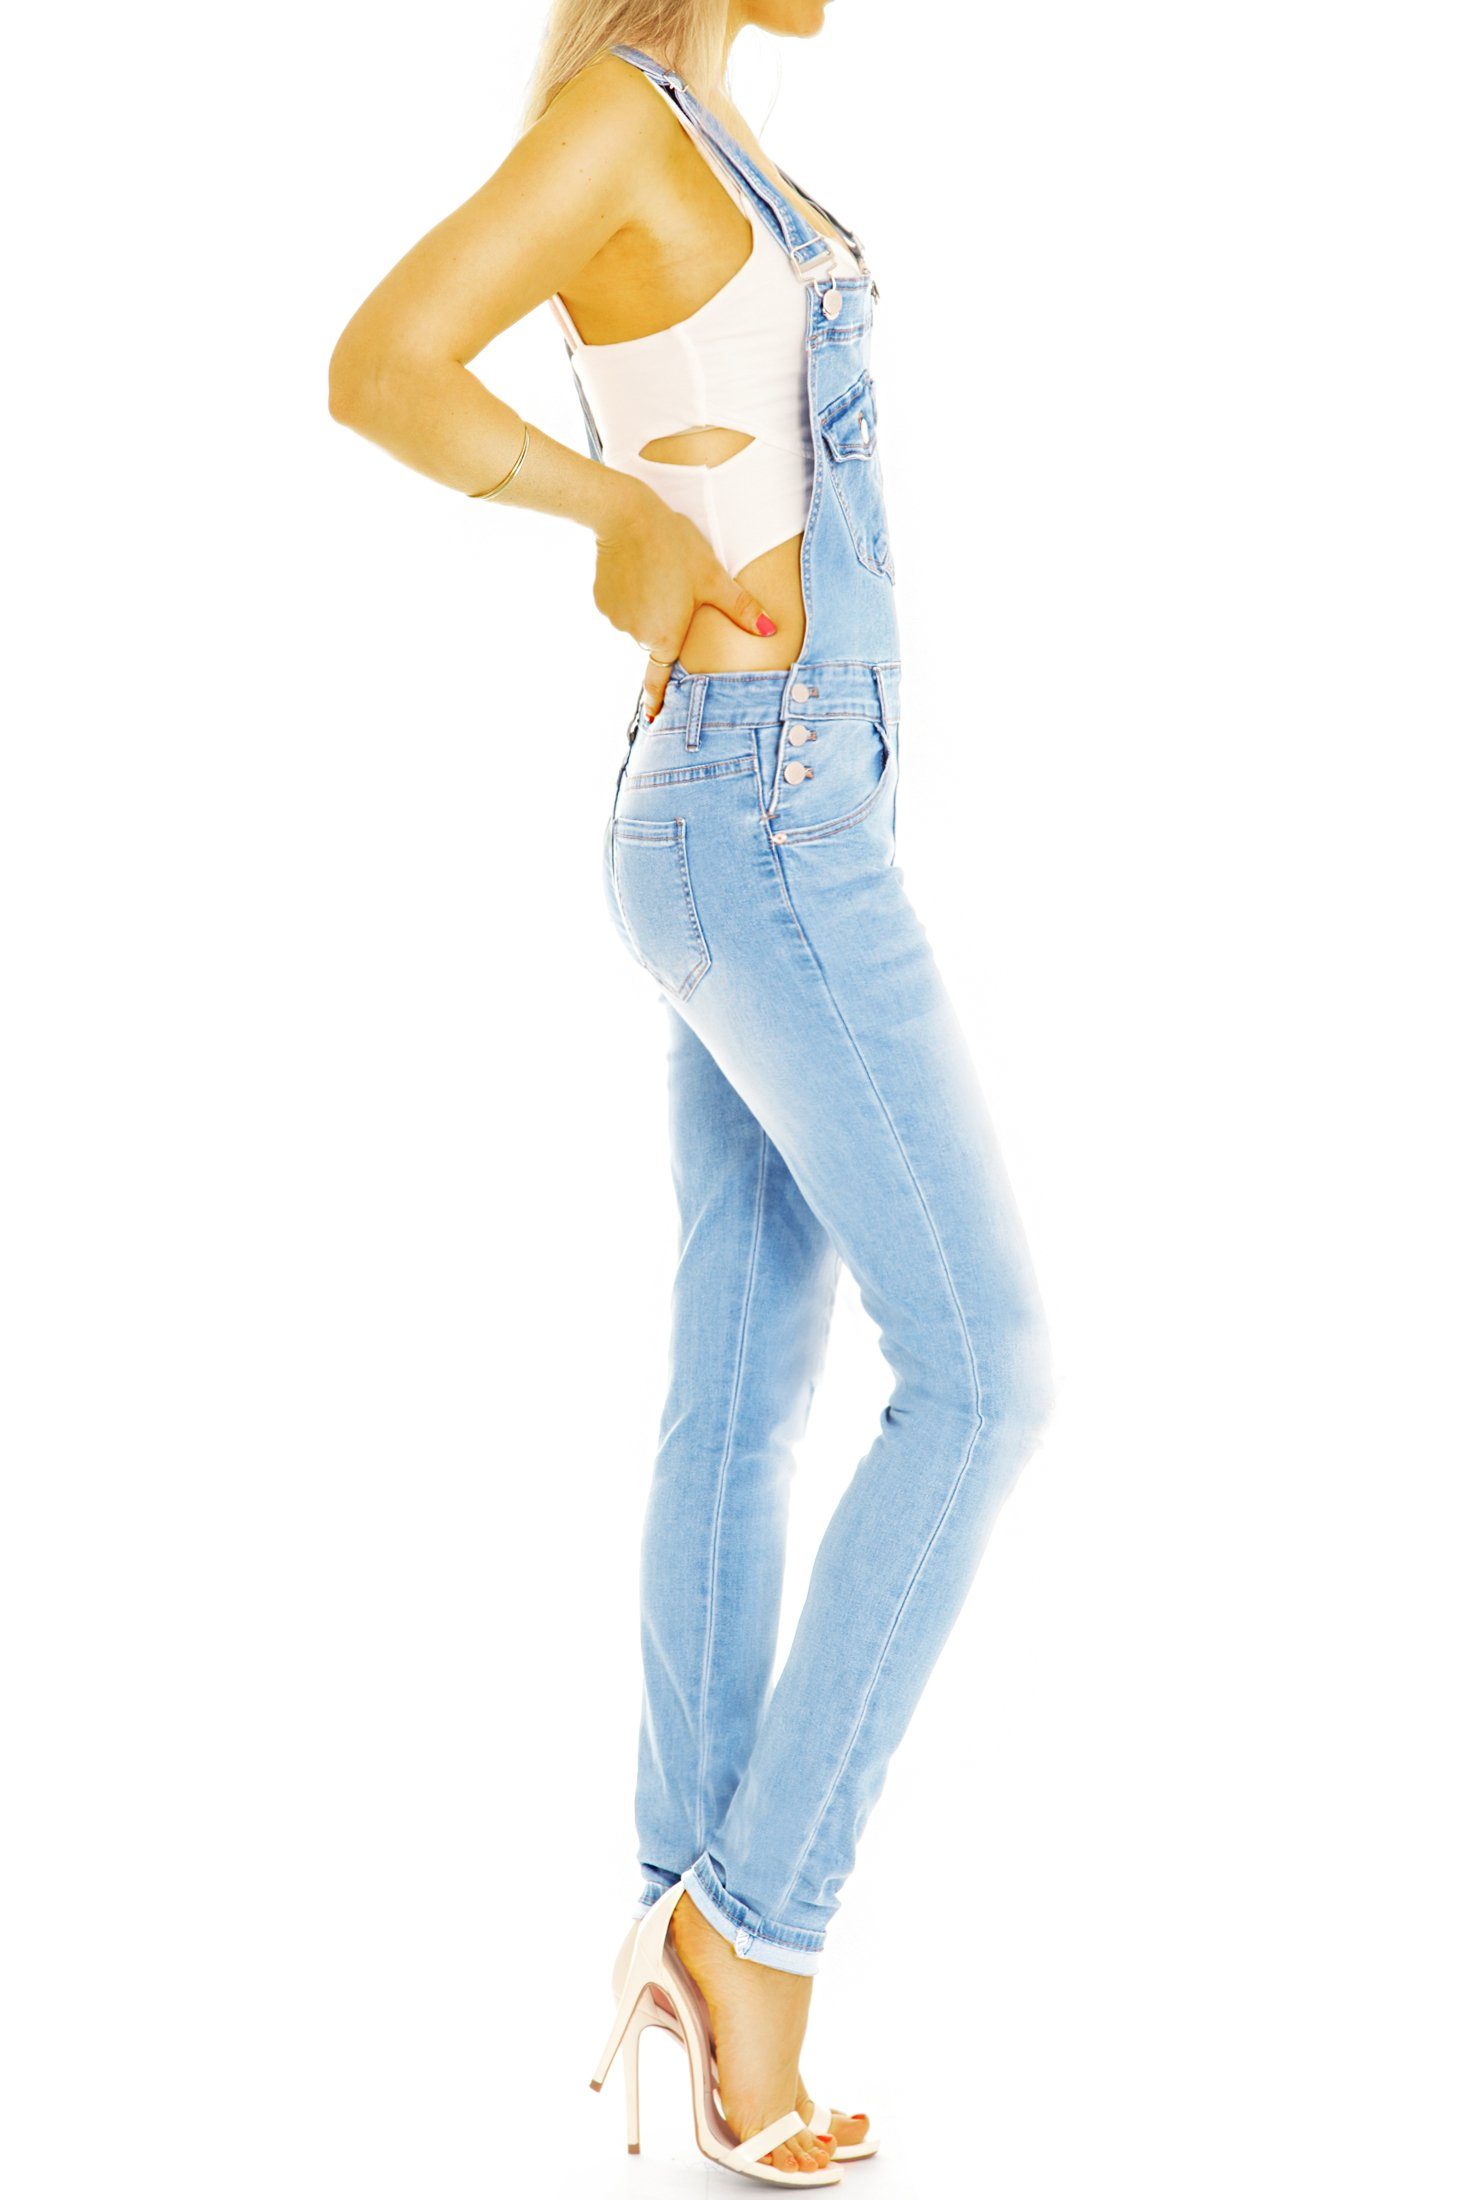 Damen bequemer - Jeans Overall be in Jeanslatzhose j20g hellblau Latzhose - skinny fit Stretch-Anteil, 5-Pocket-Style mit styled